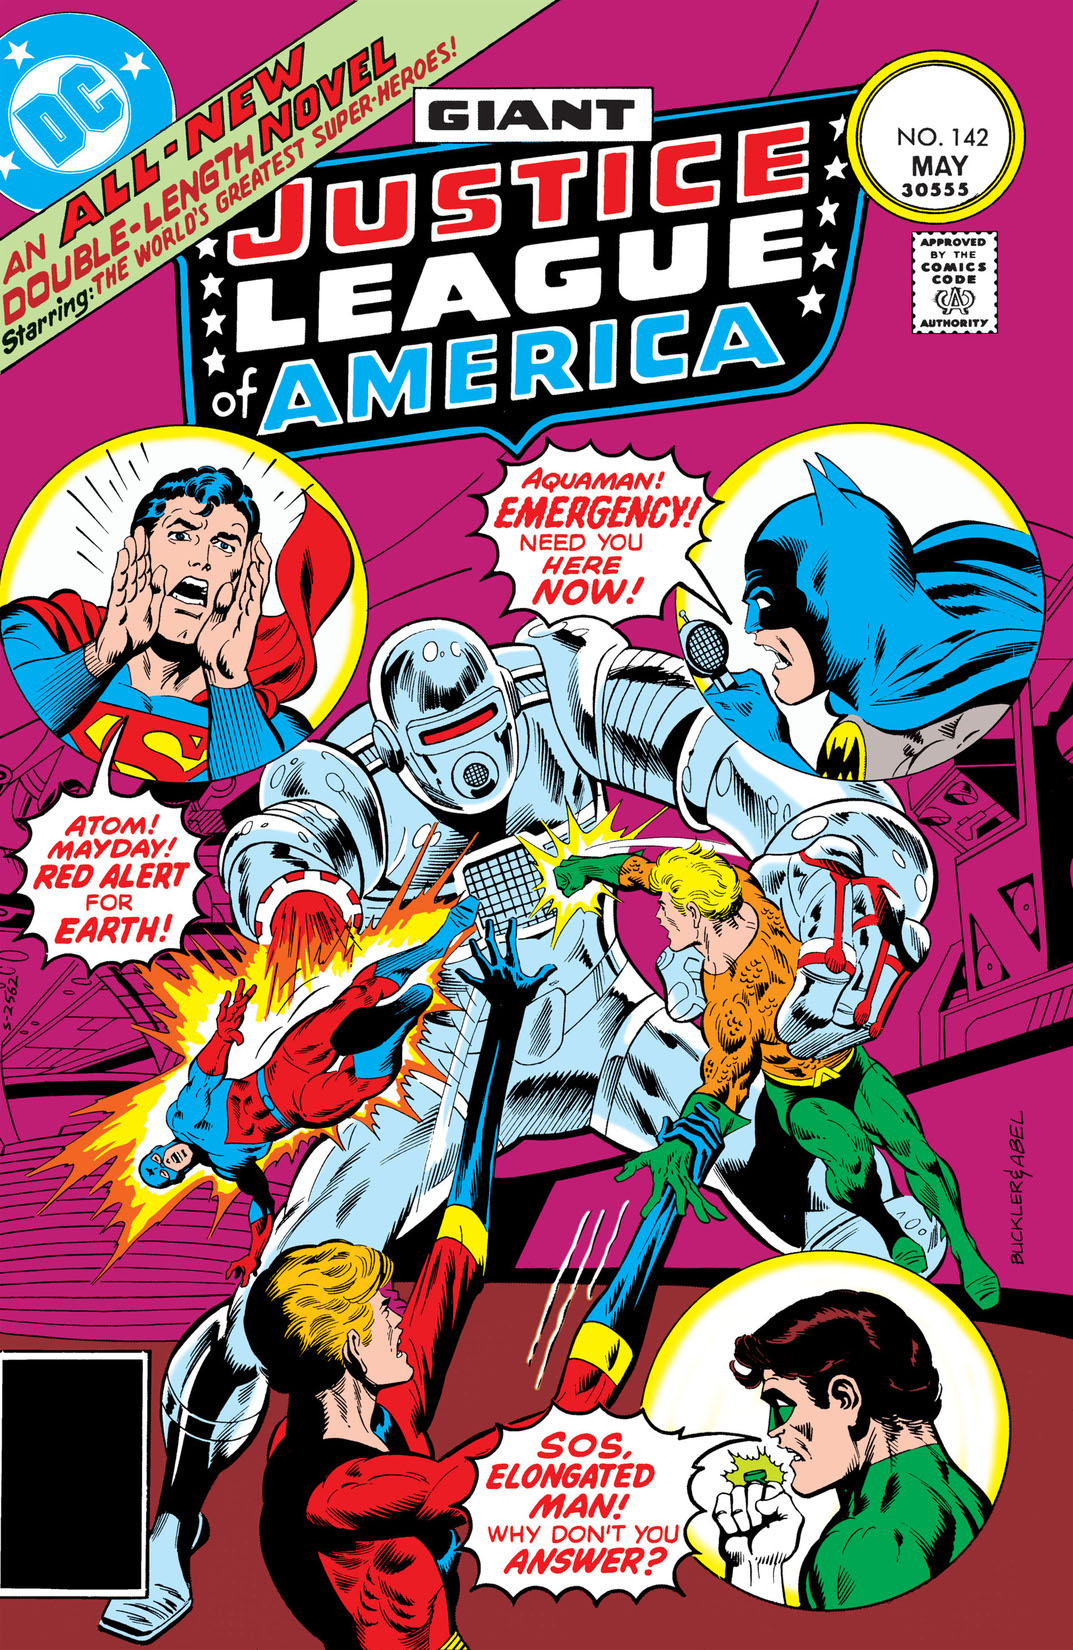 Justice League of America (1960-) #142 preview images